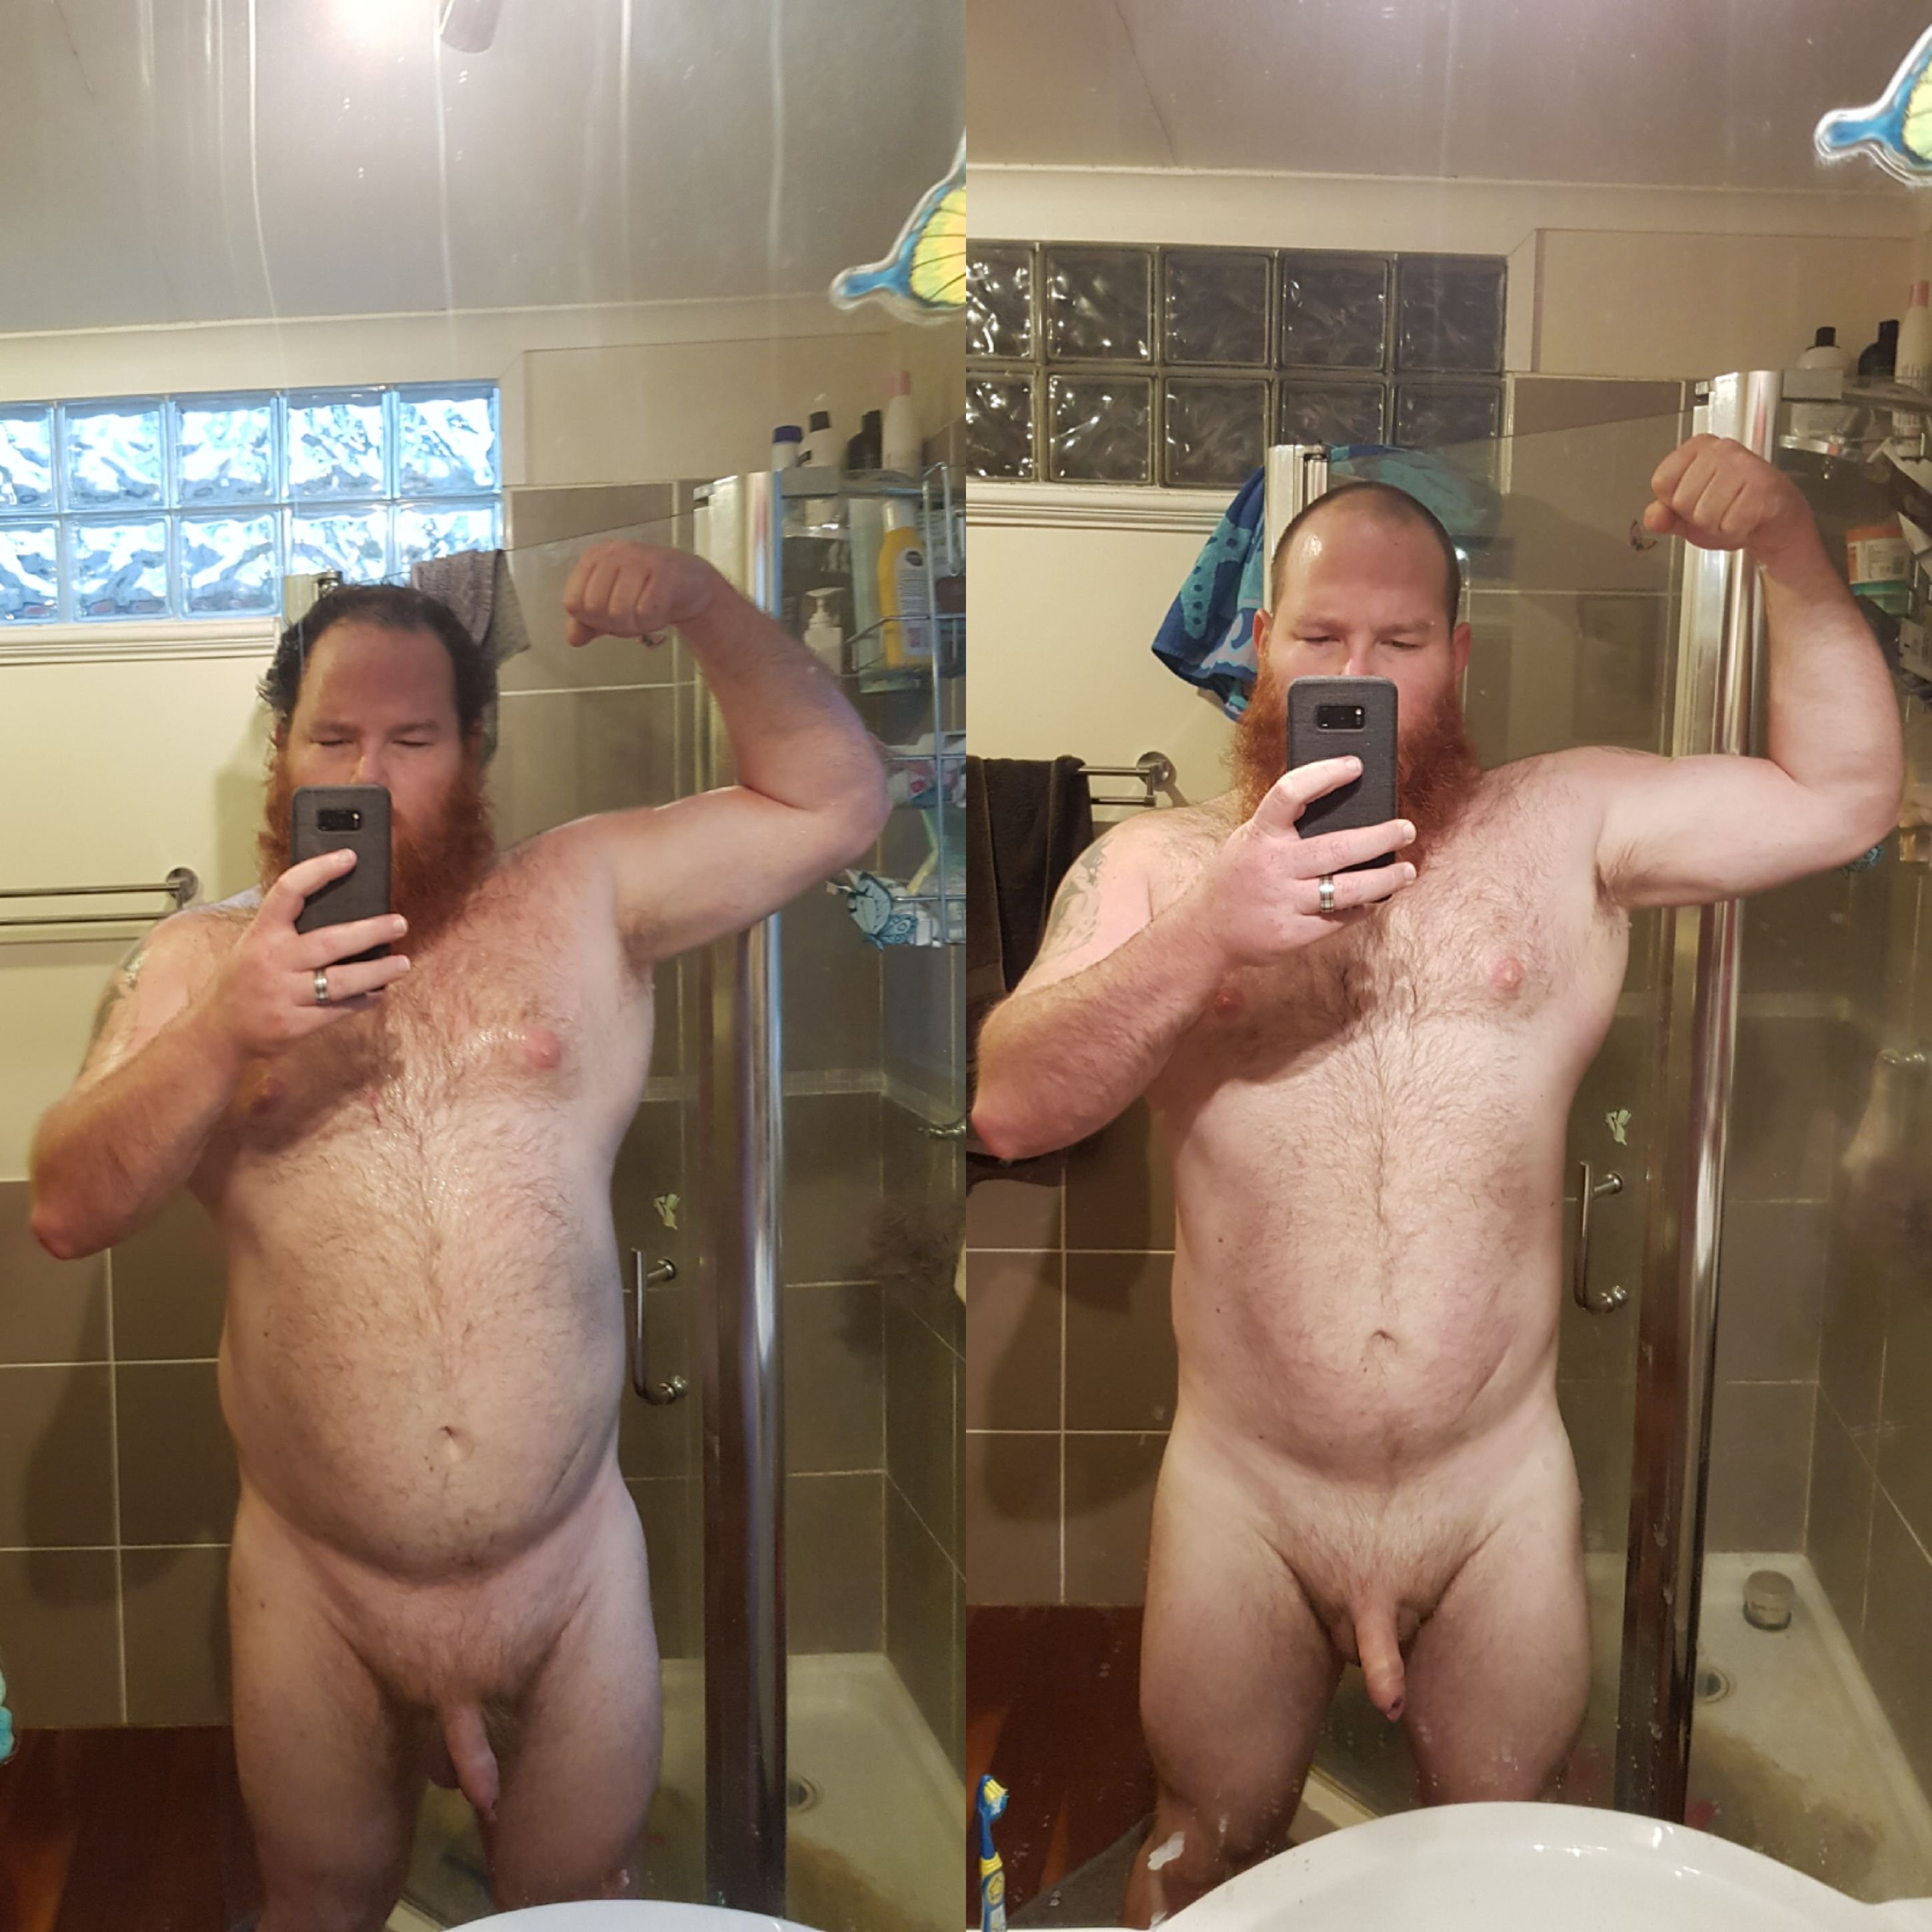 31/275/6'2. 33lbs down in 4 months